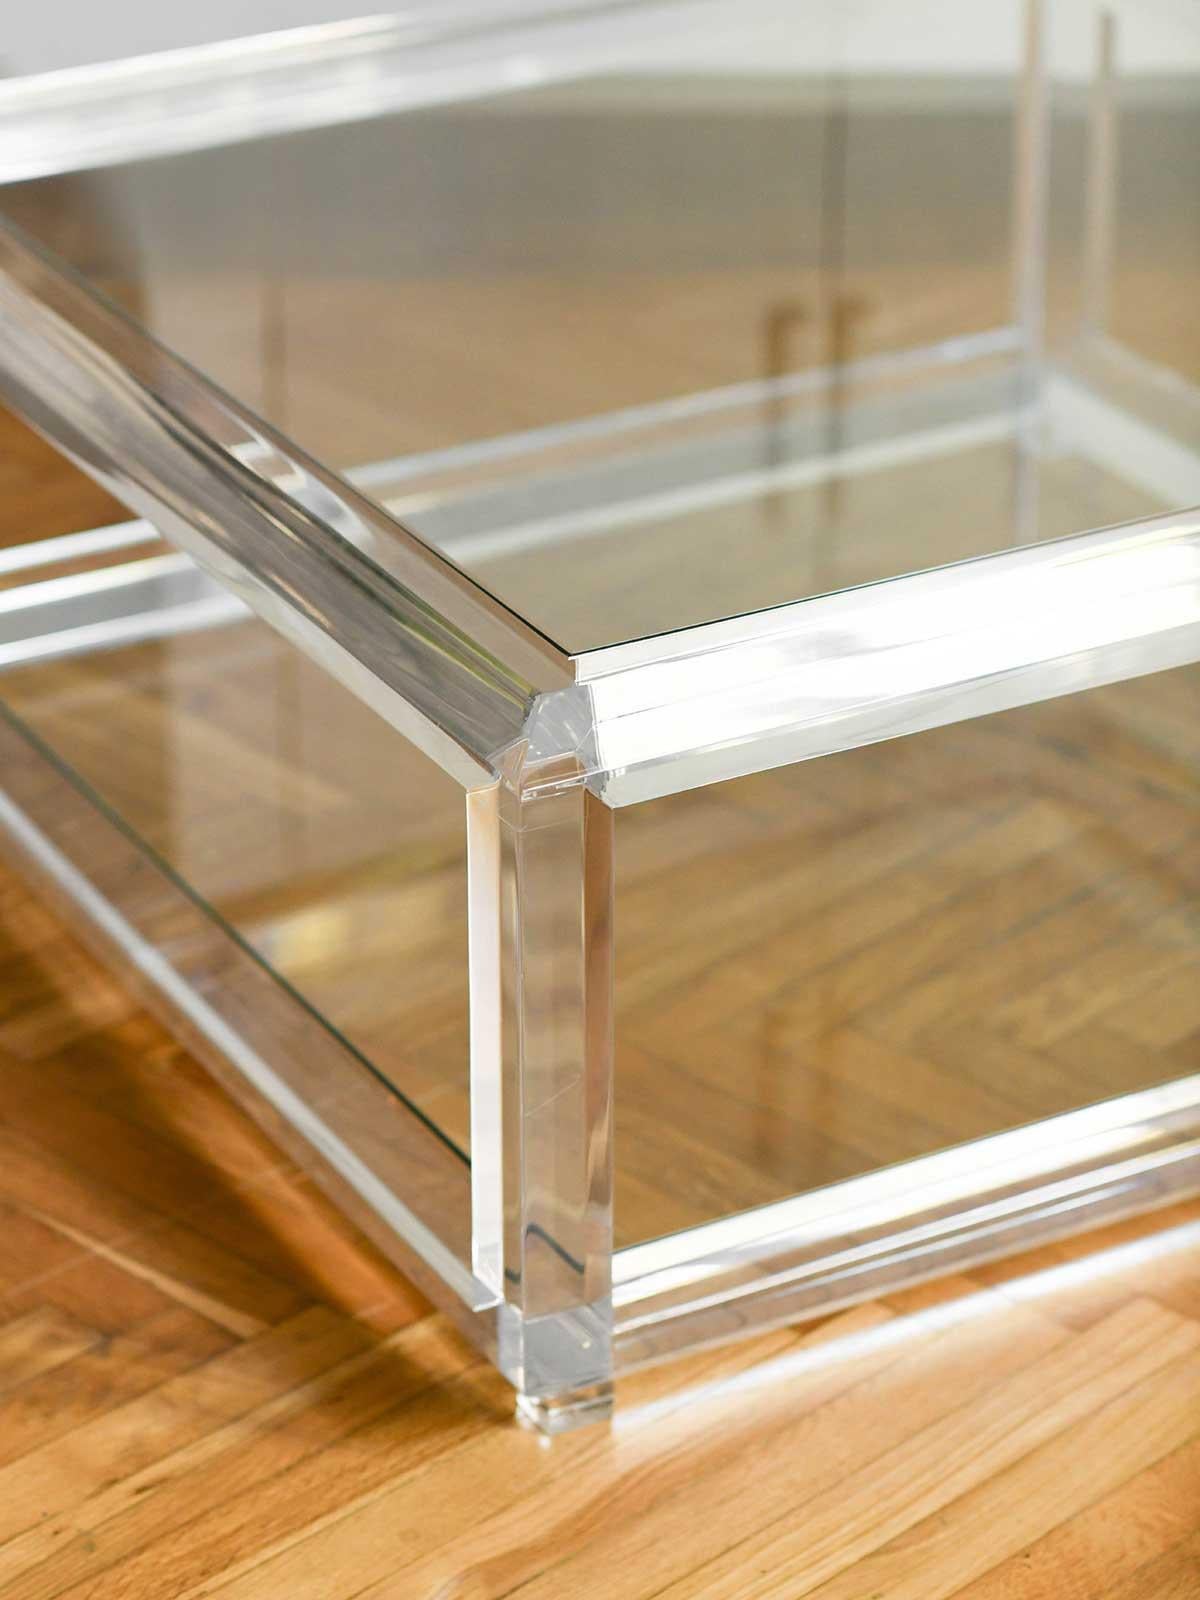 Large transparent coffee table, made of glass and methacrylate, Italy 1970
Product details
Dimensions: 100 W x 43 H x 100 D